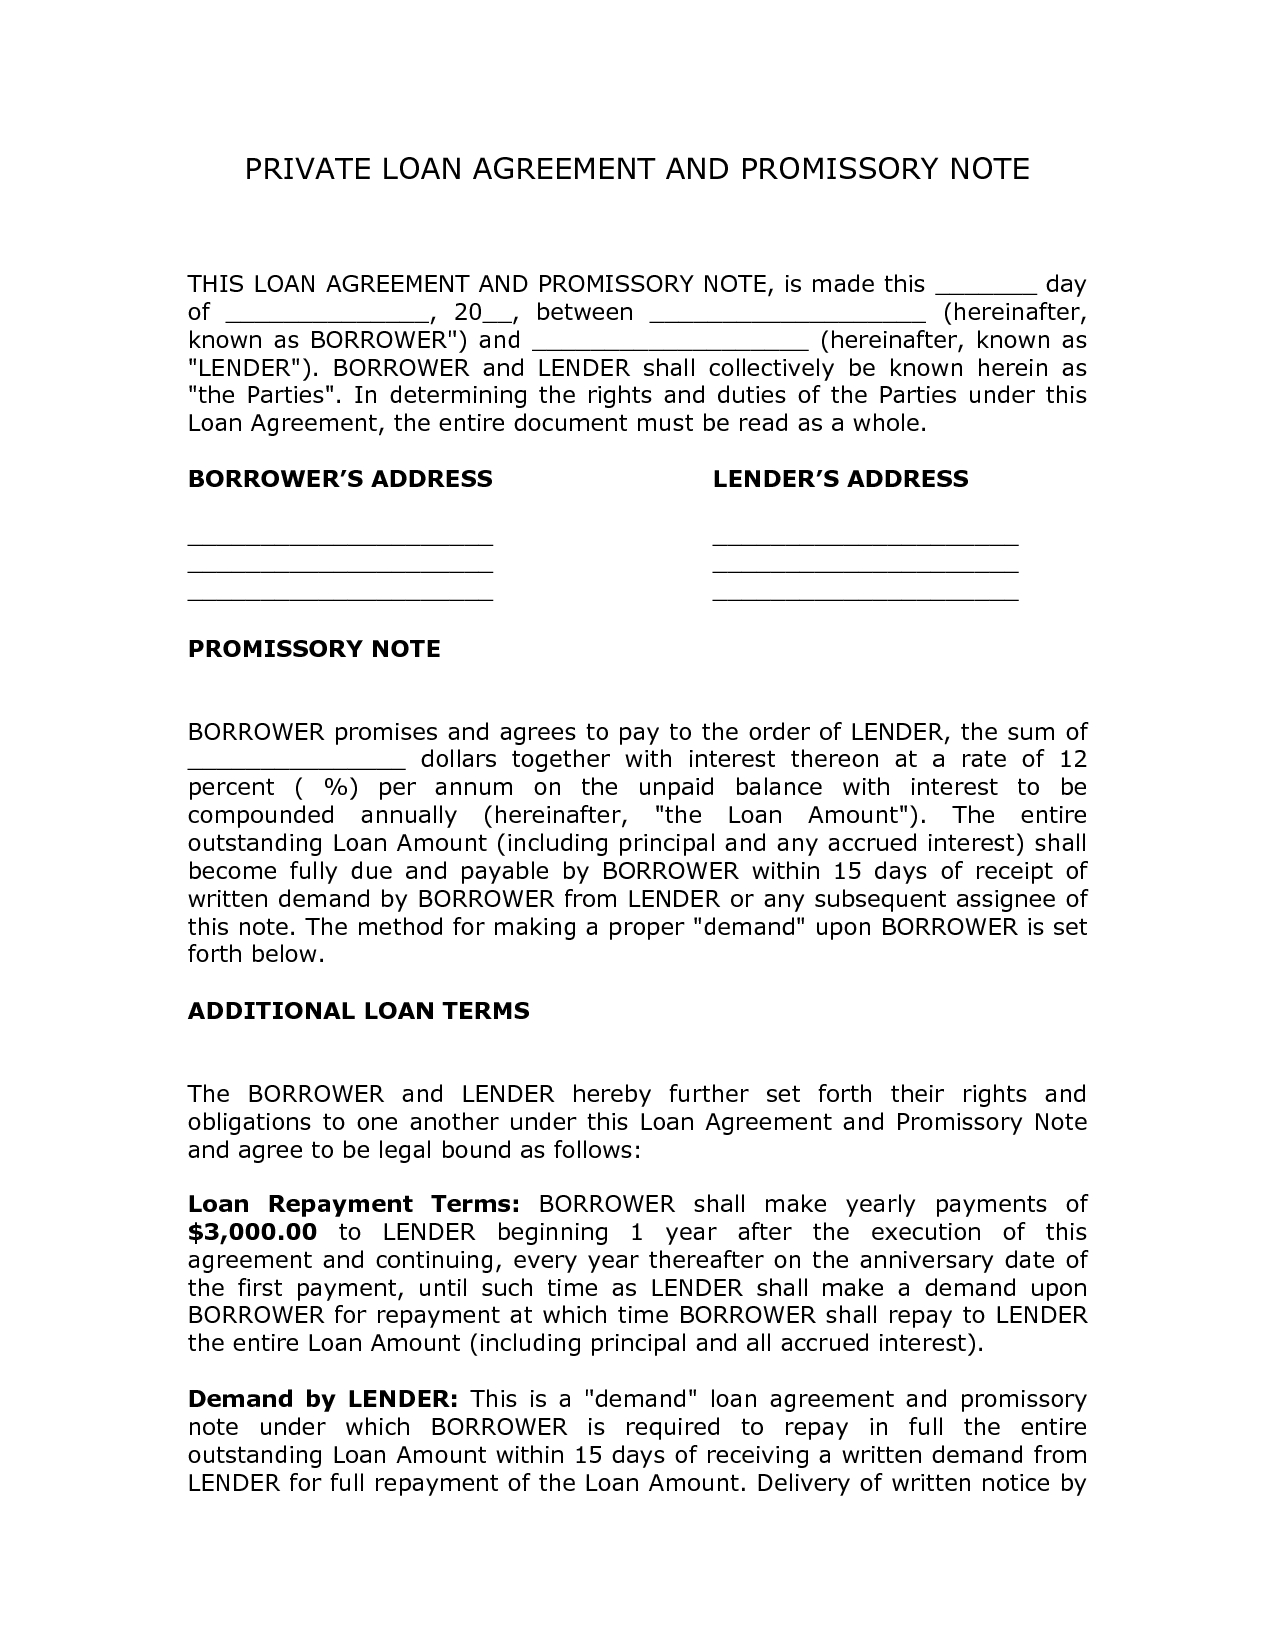 Free Loan Agreement Form Corporate Loan Contract Sample Private Agreement Template Bunch Best